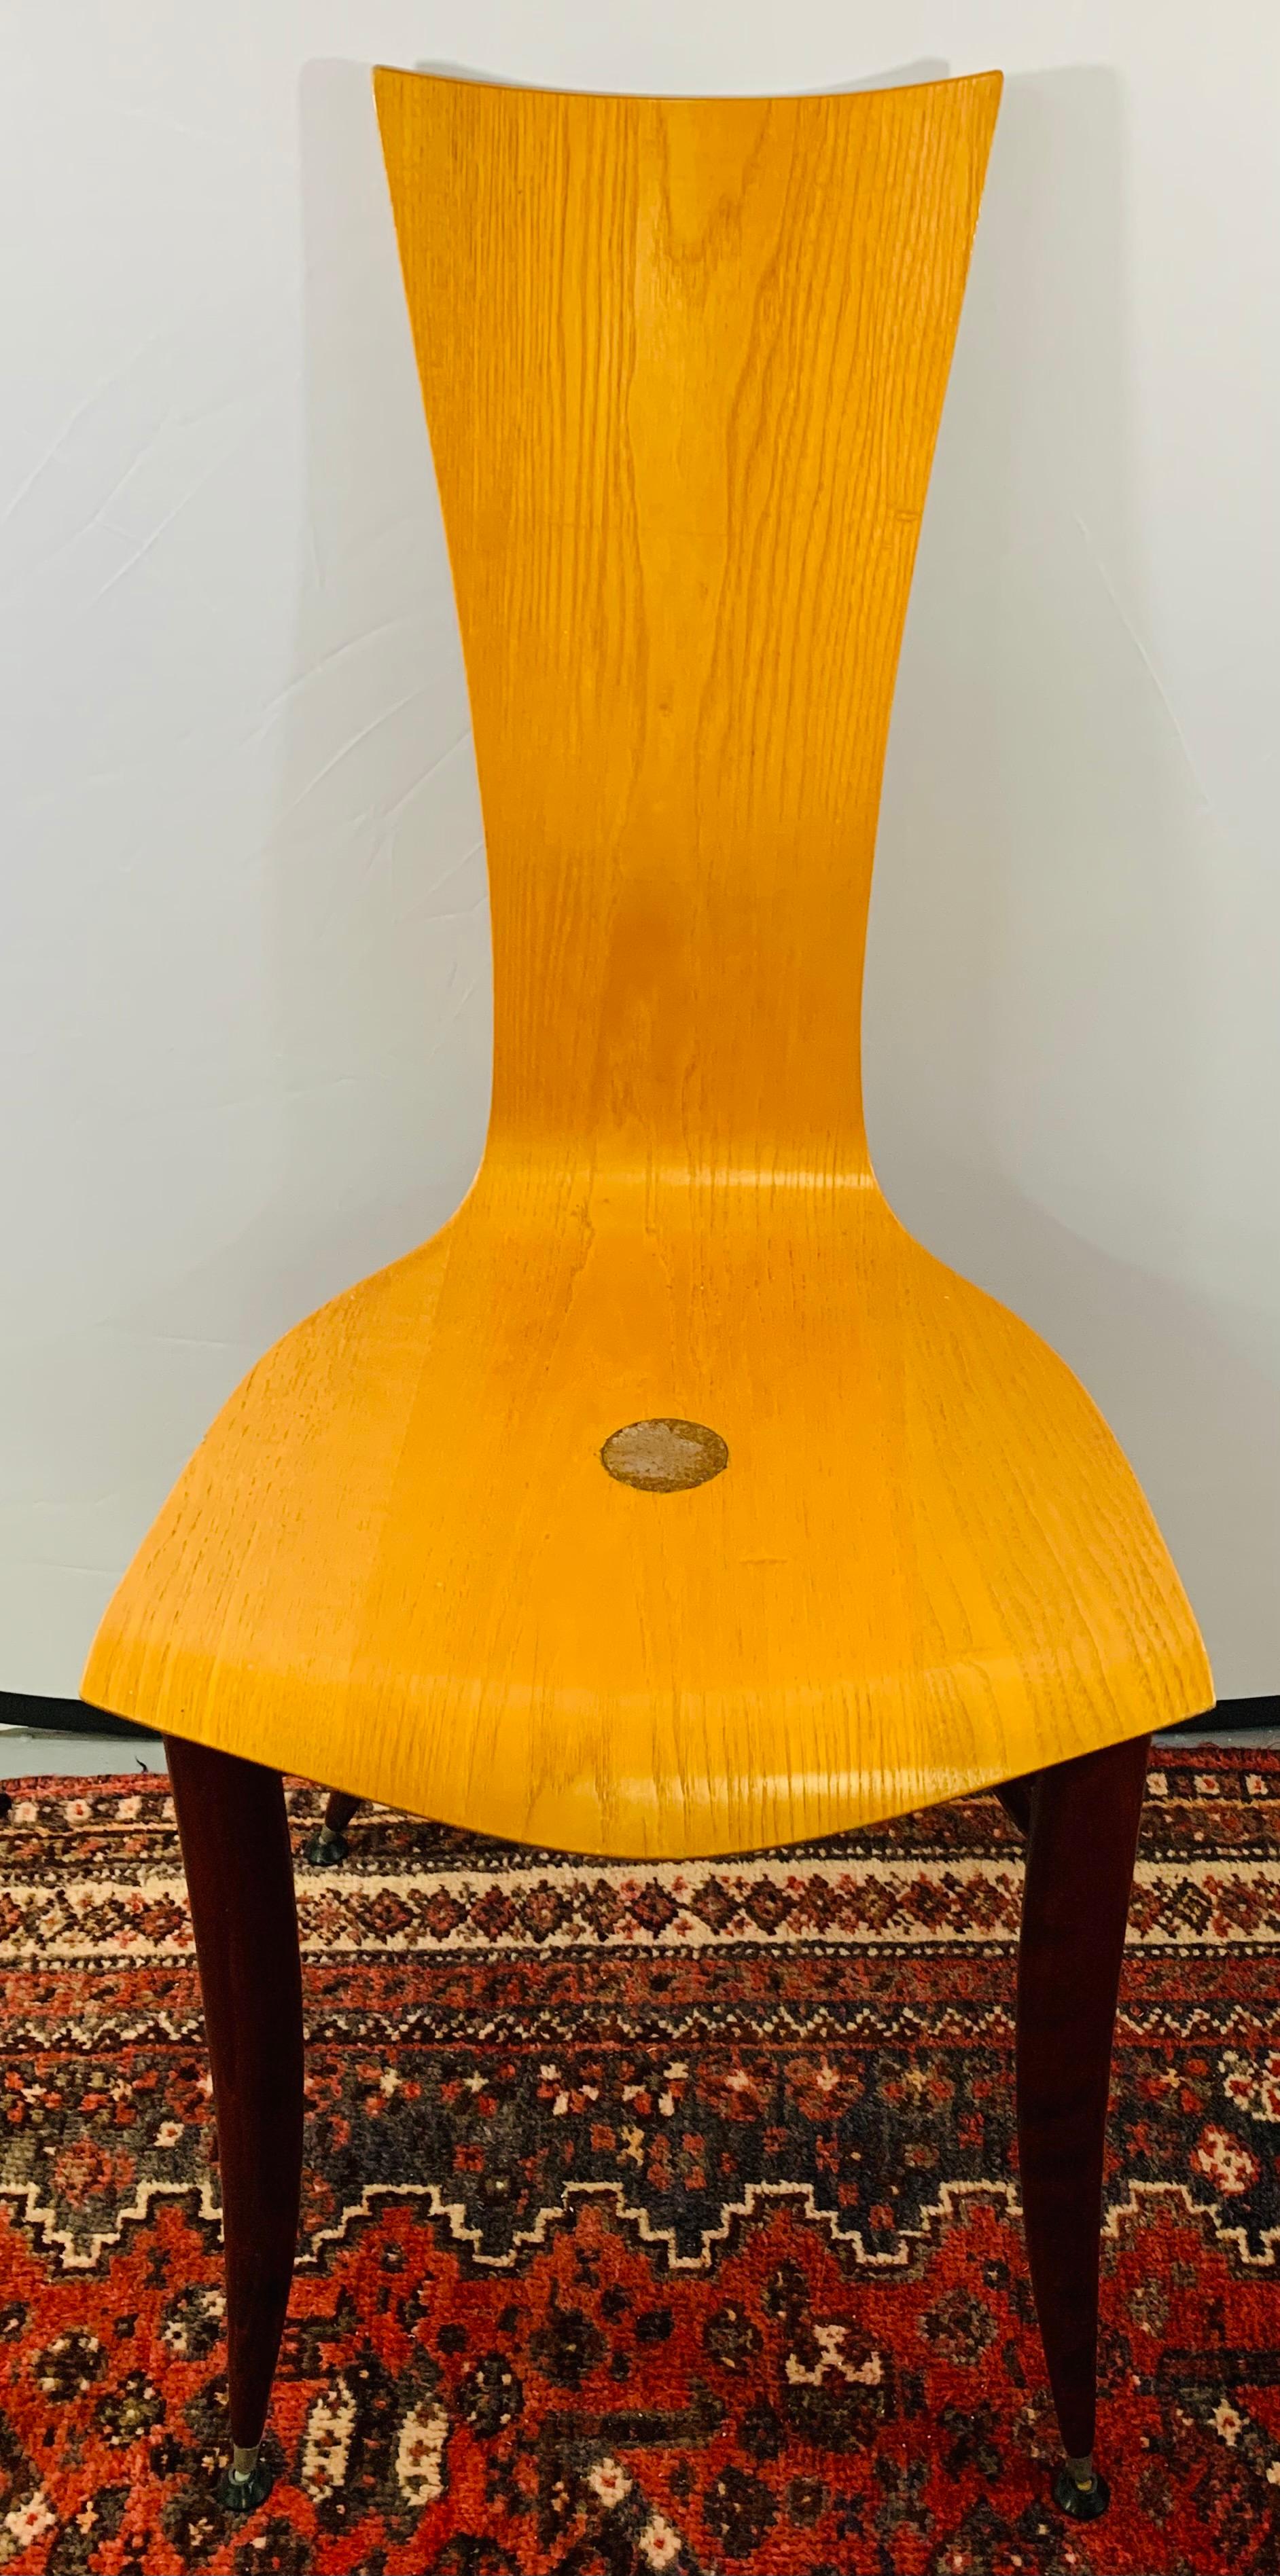 A stylish pair of Mid-Century Modern wooden chairs in the manner of the Italian designer Umberto Mascagni. The legs are finely painted in cherrywood color and are beautifully carved. The wood is in good condition with some minor fading as shown on